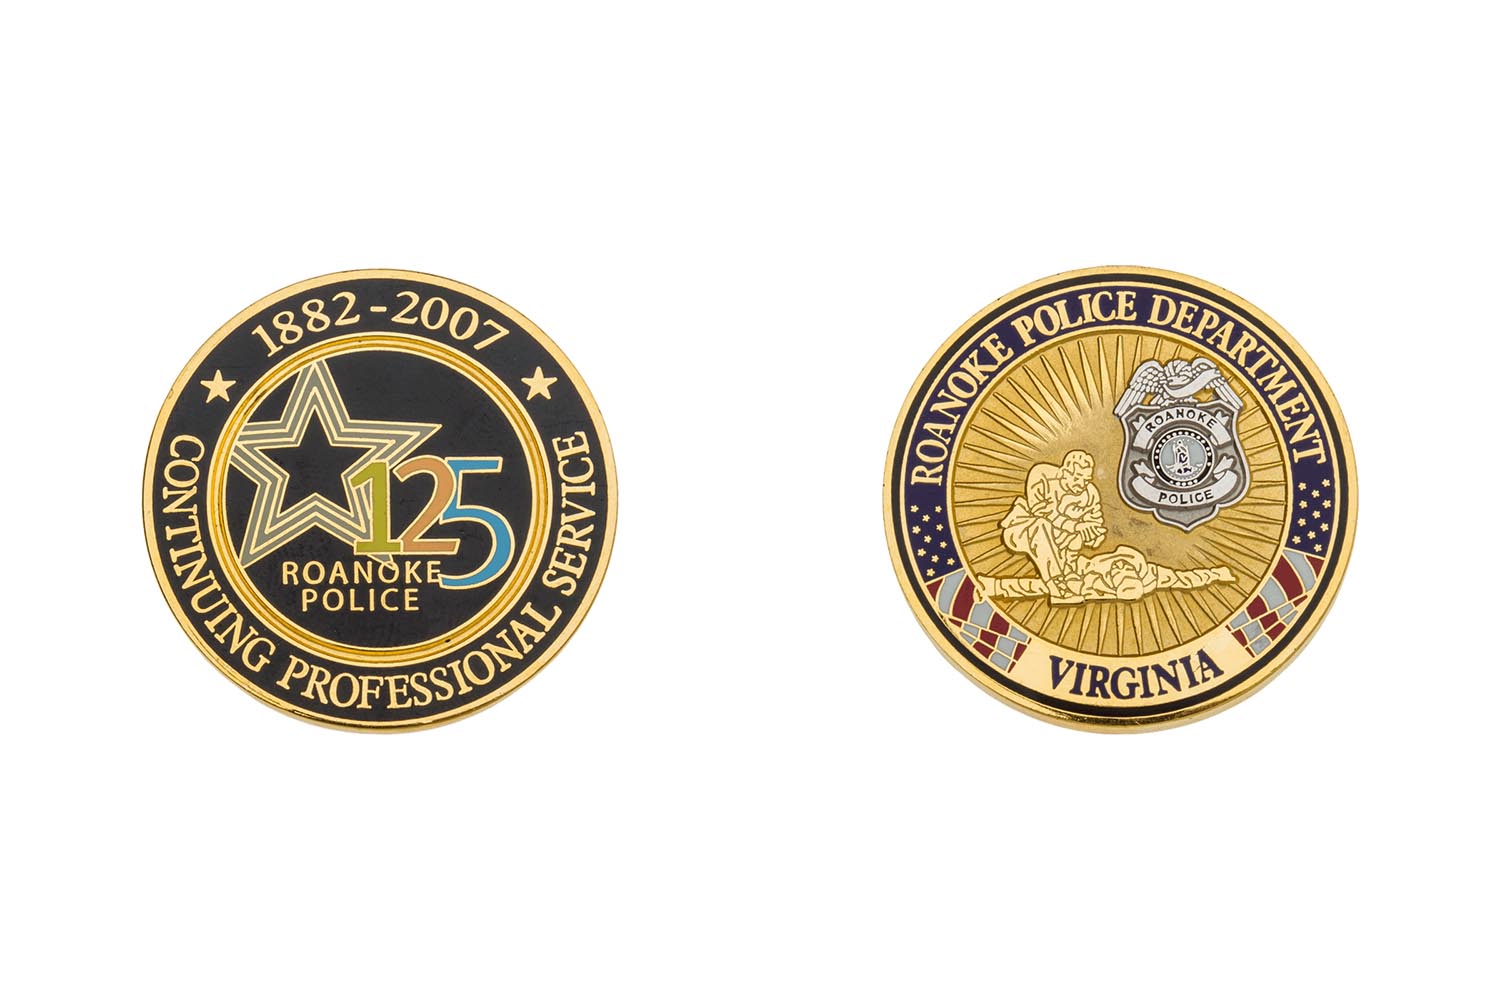 Metal police coins